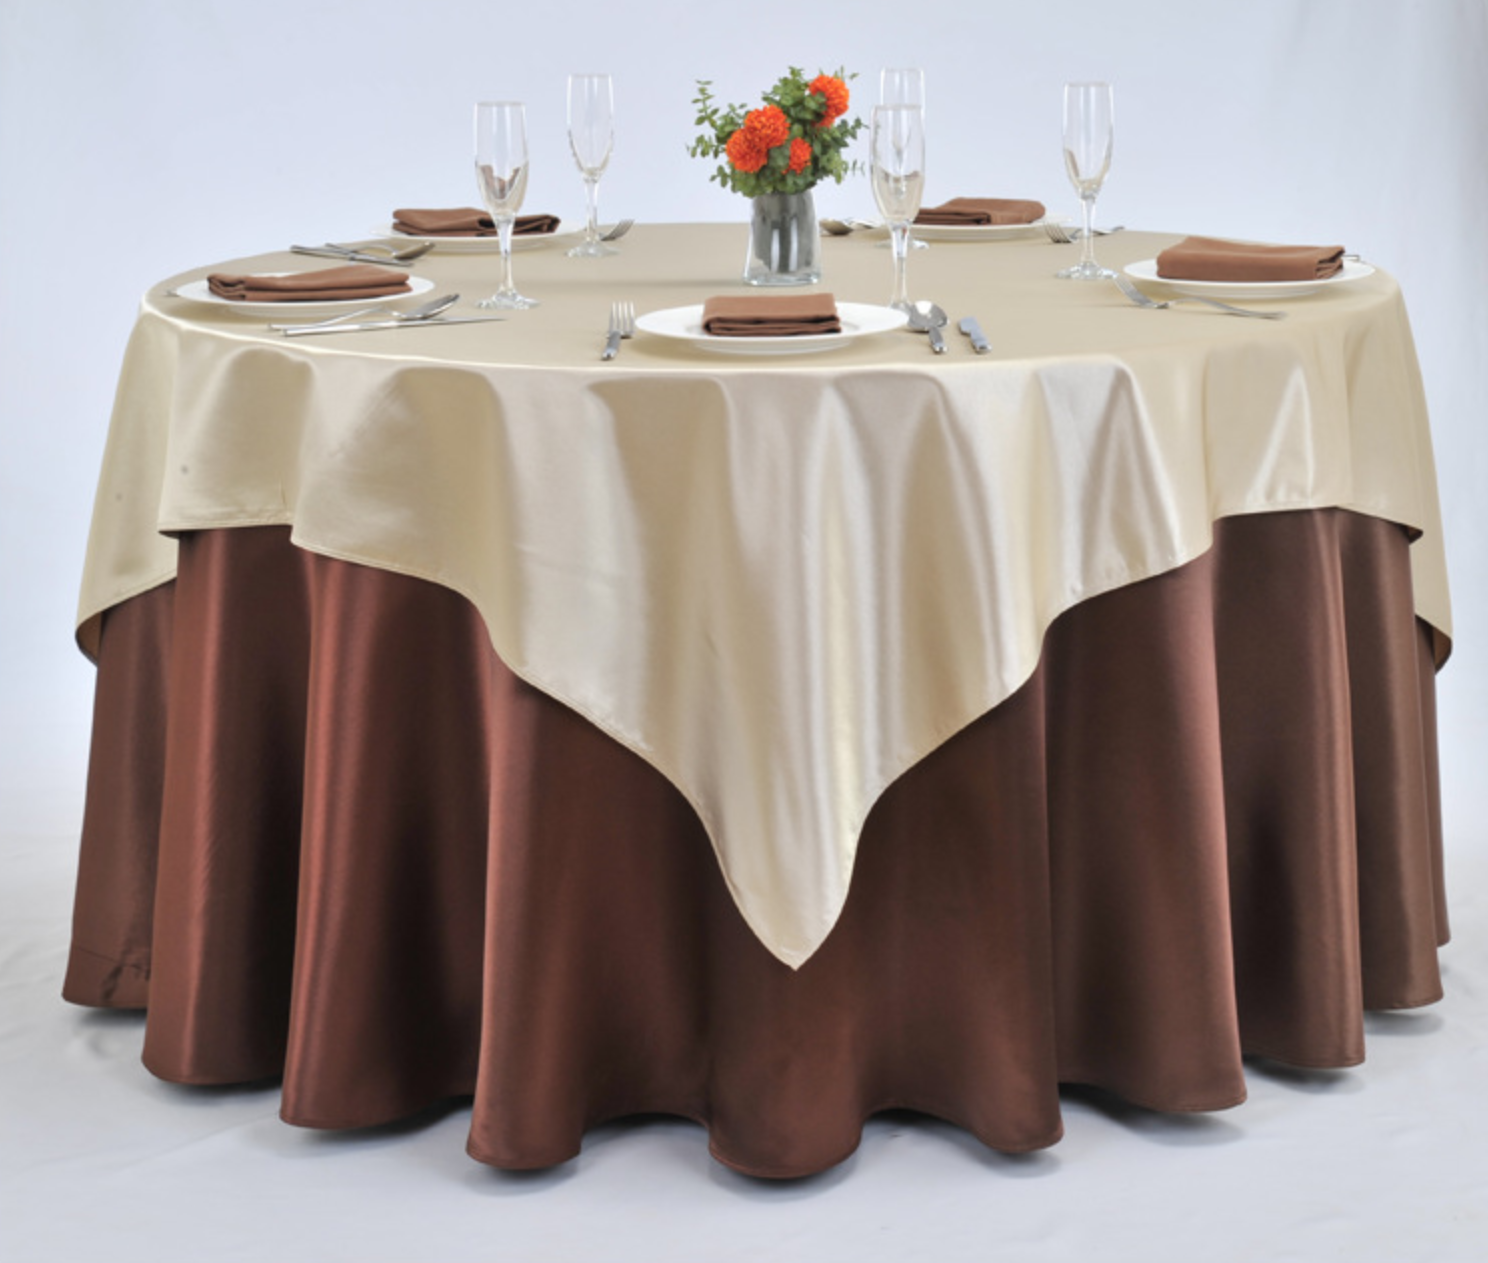 hotel tablecloth hotel tablecloth round tablecloth dining tablecloth fabric satin champagne brown tablecloth customization